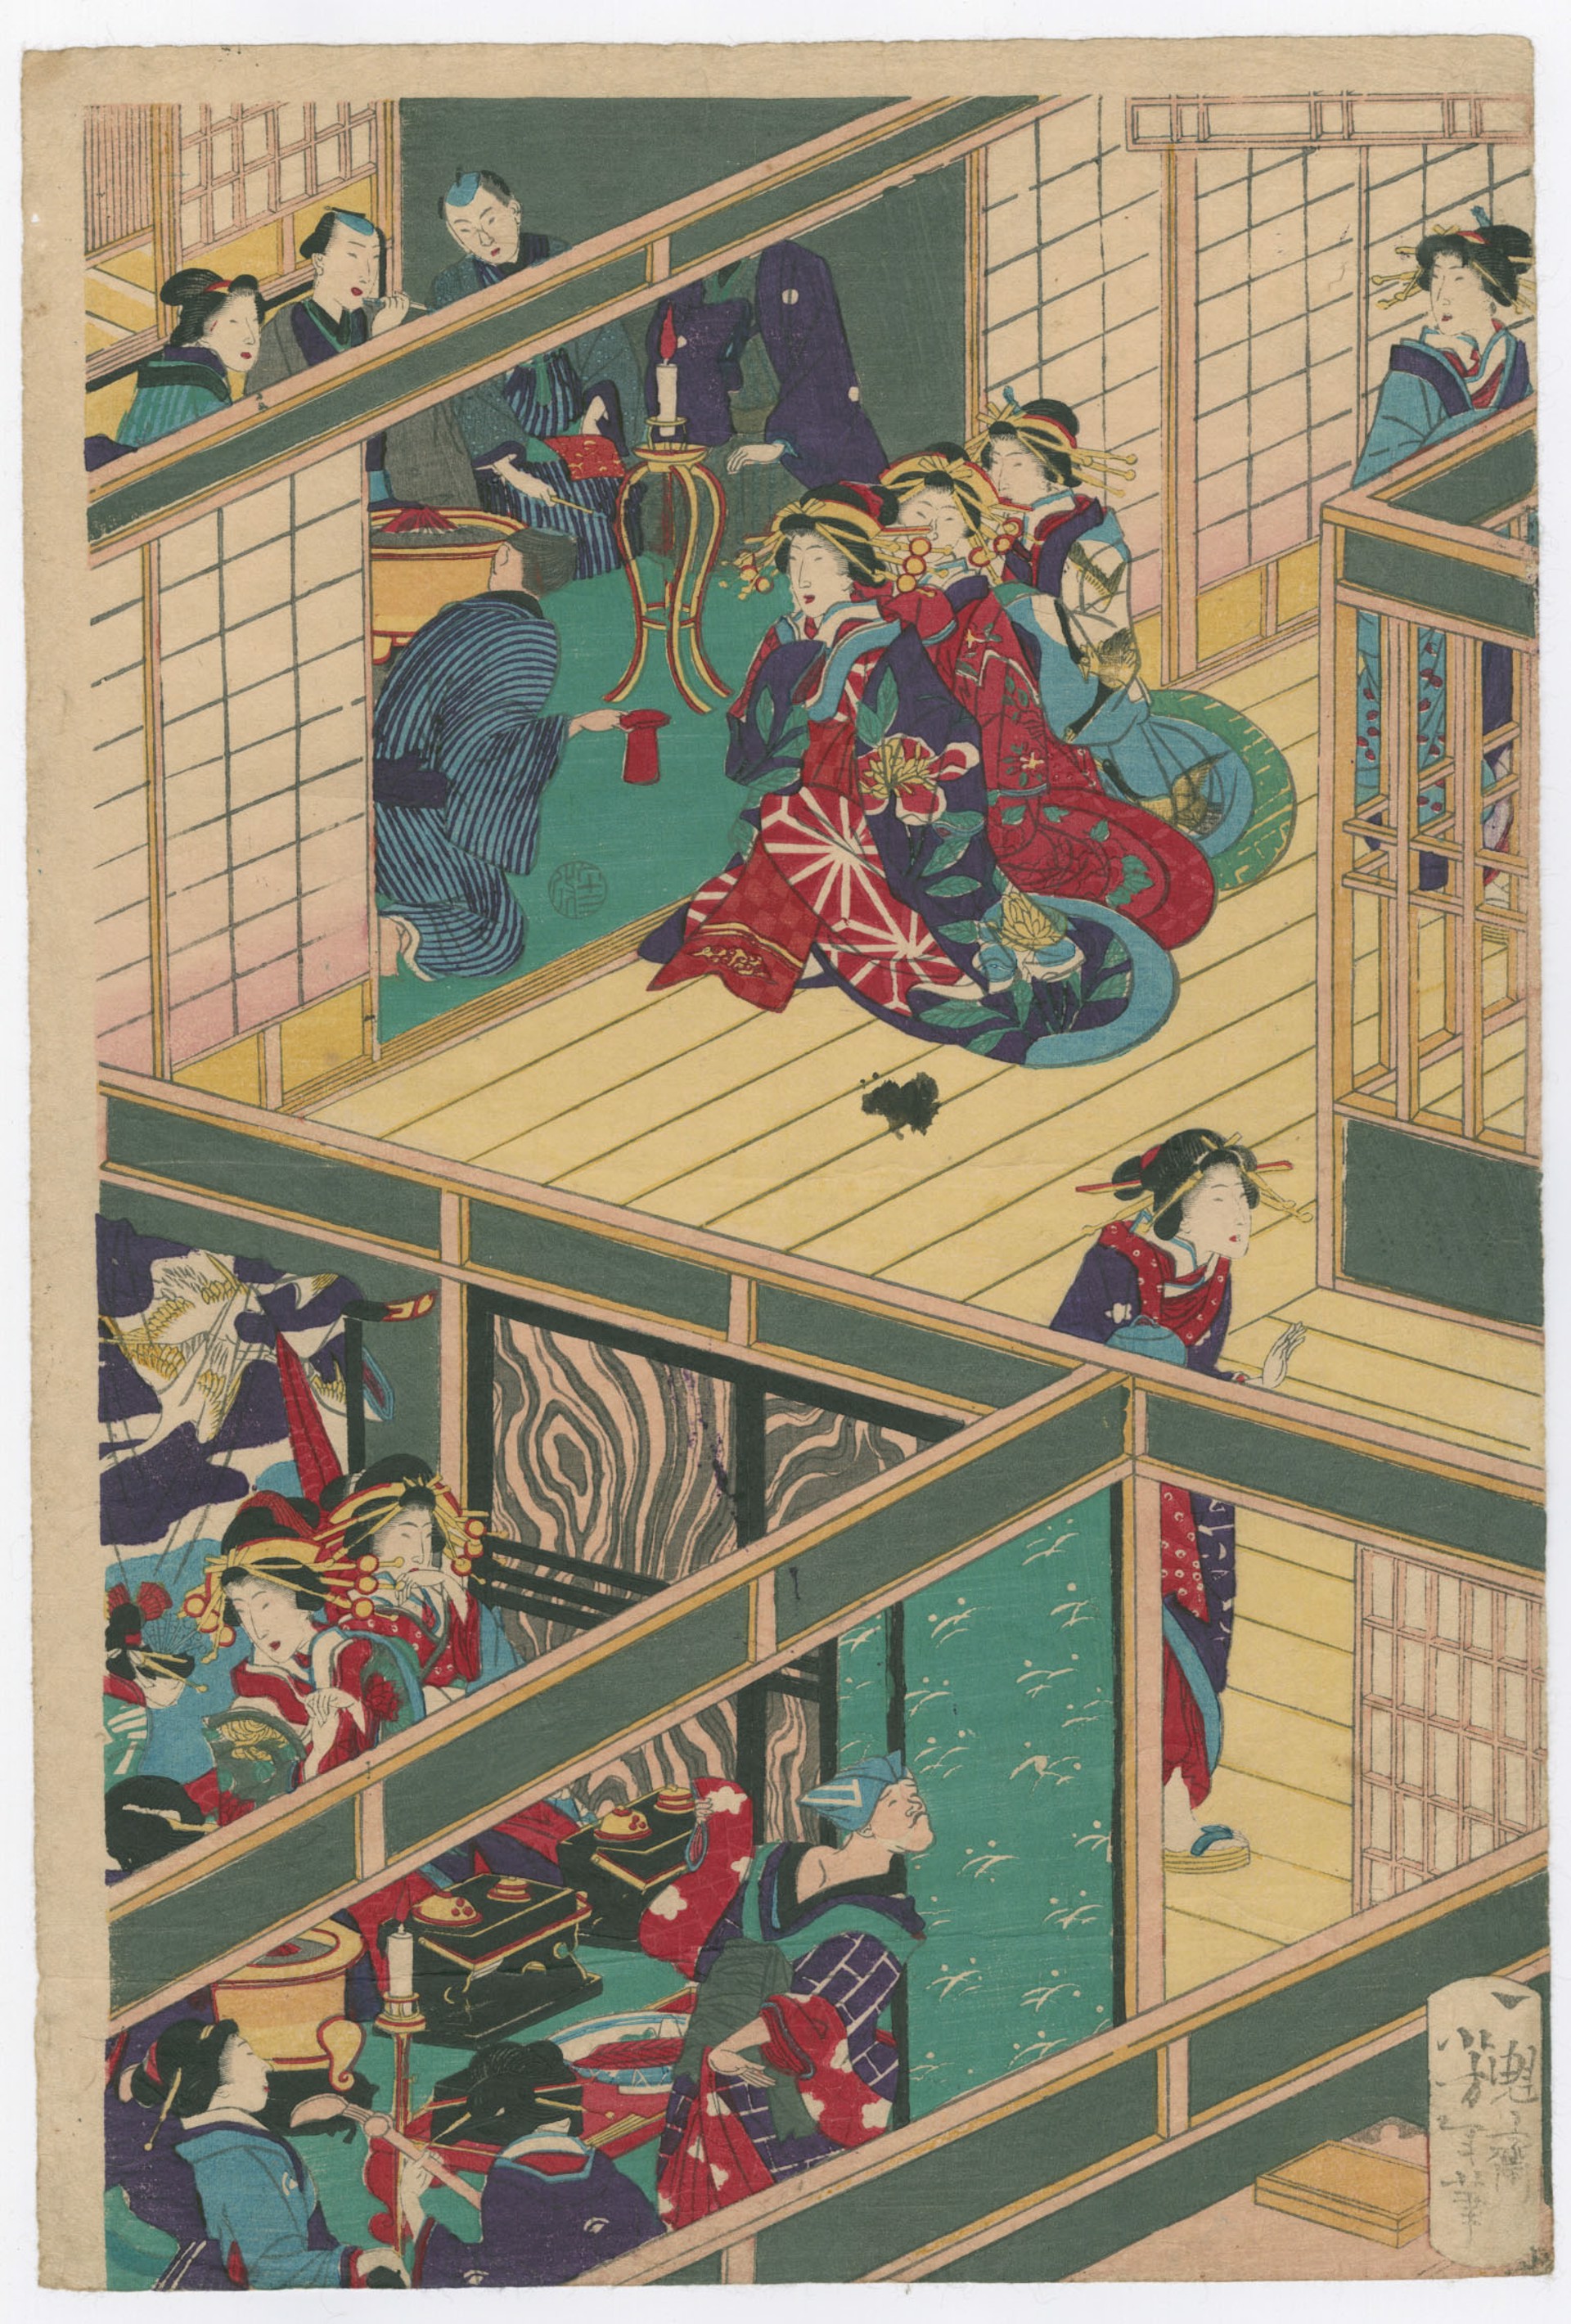 A Complete View of a Courtesan House in Tokyo by Yoshitoshi